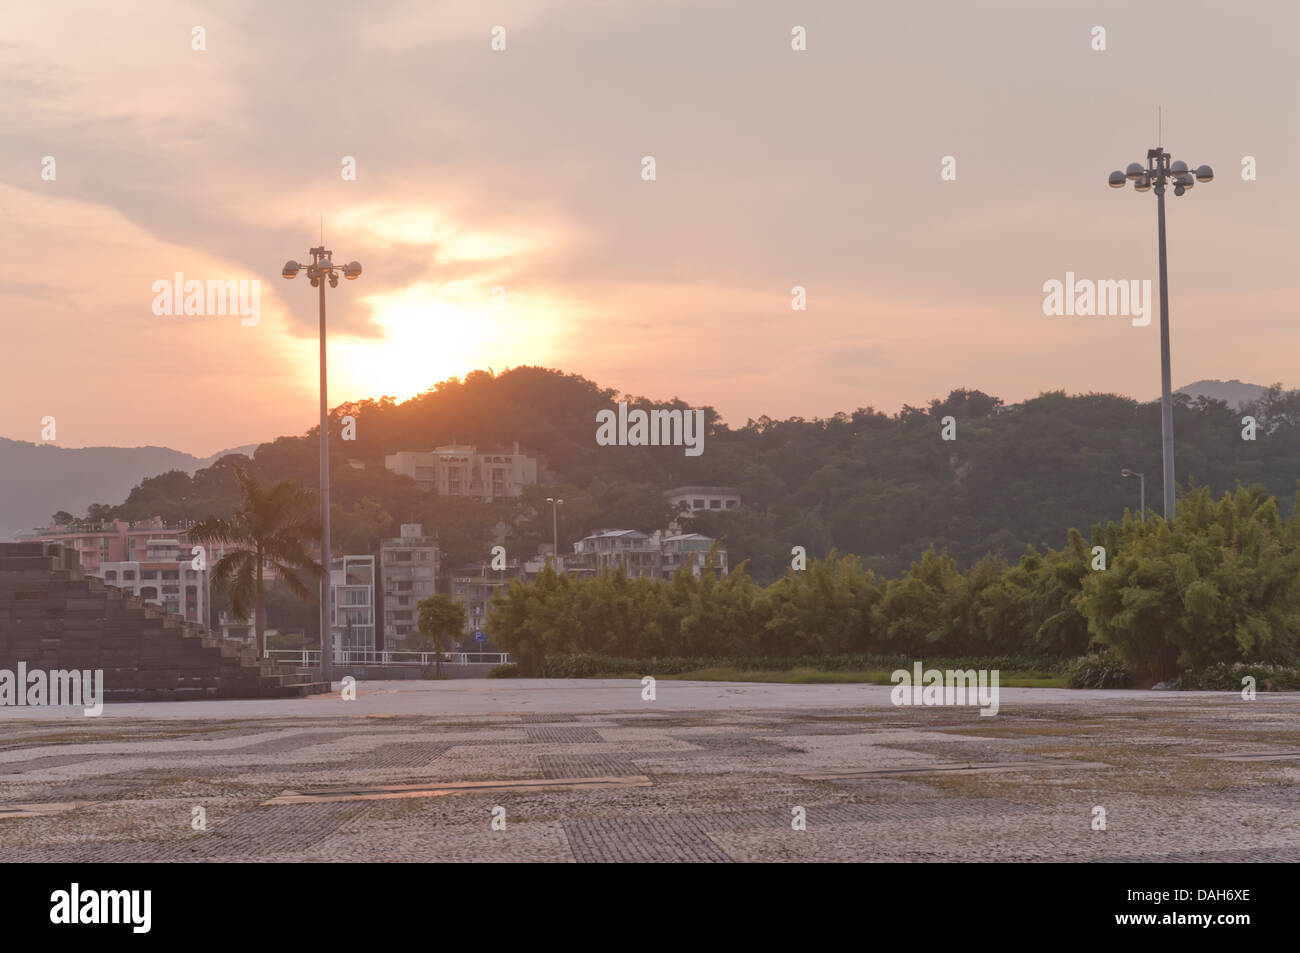 Cityscape in Macao at sunset time Stock Photo